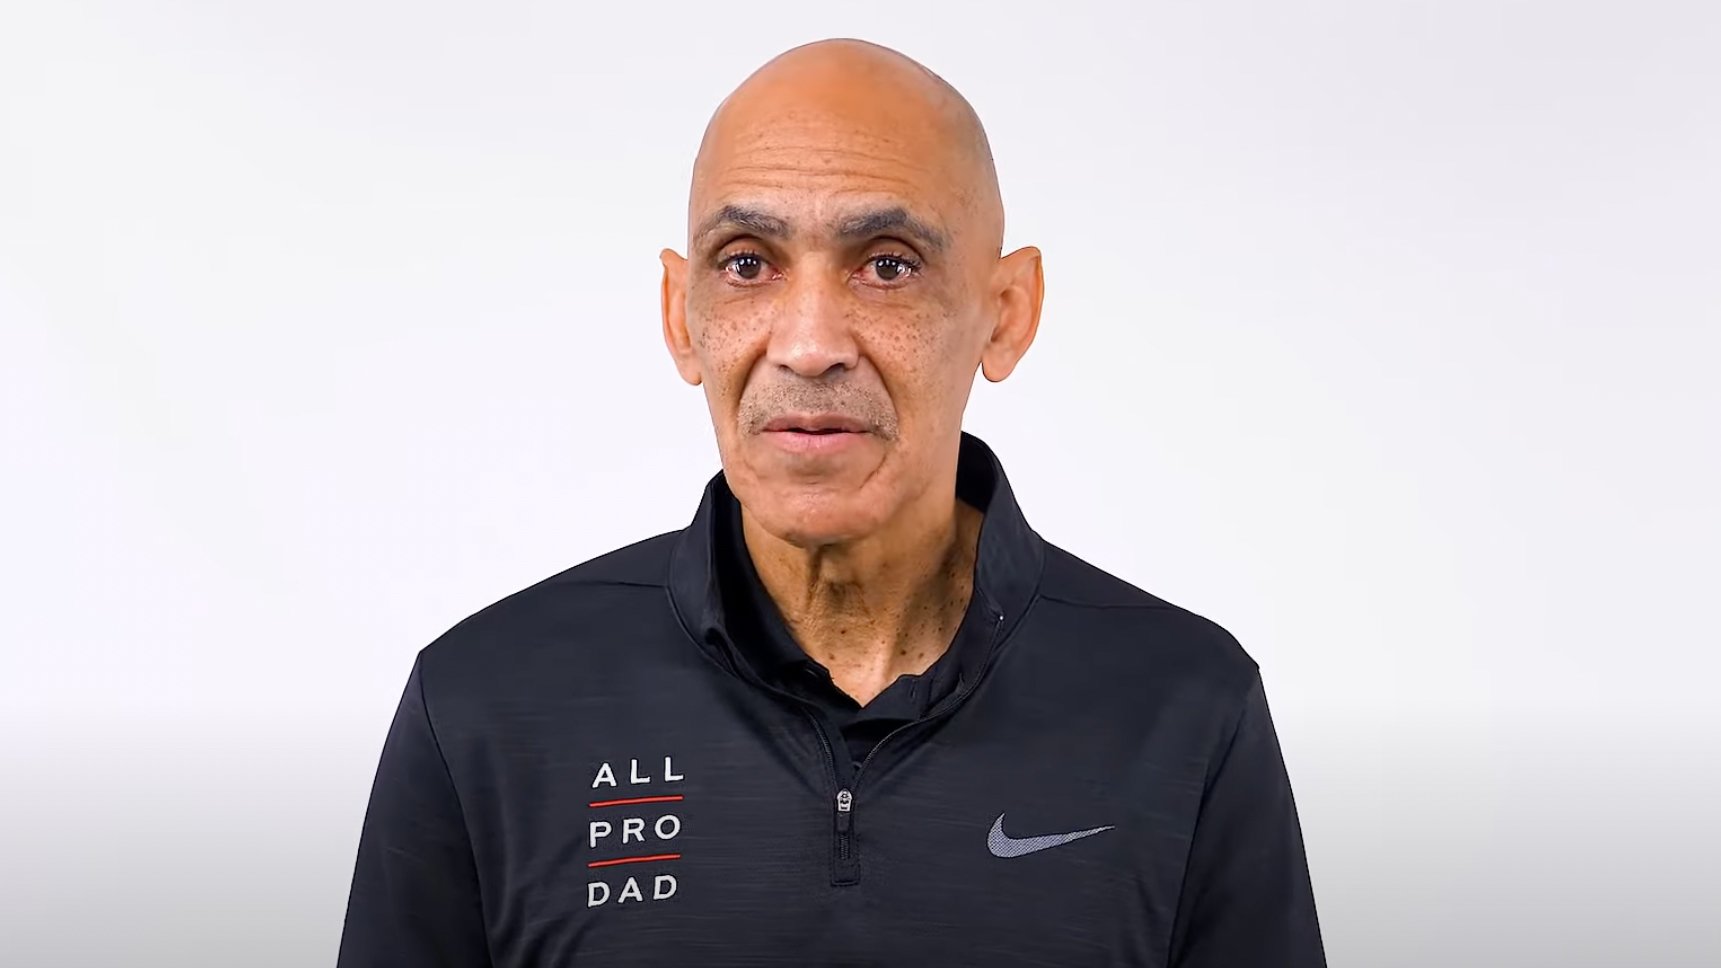 All Pro Dad, the fatherhood support started by Tony Dungy, takes to the  field Saturday